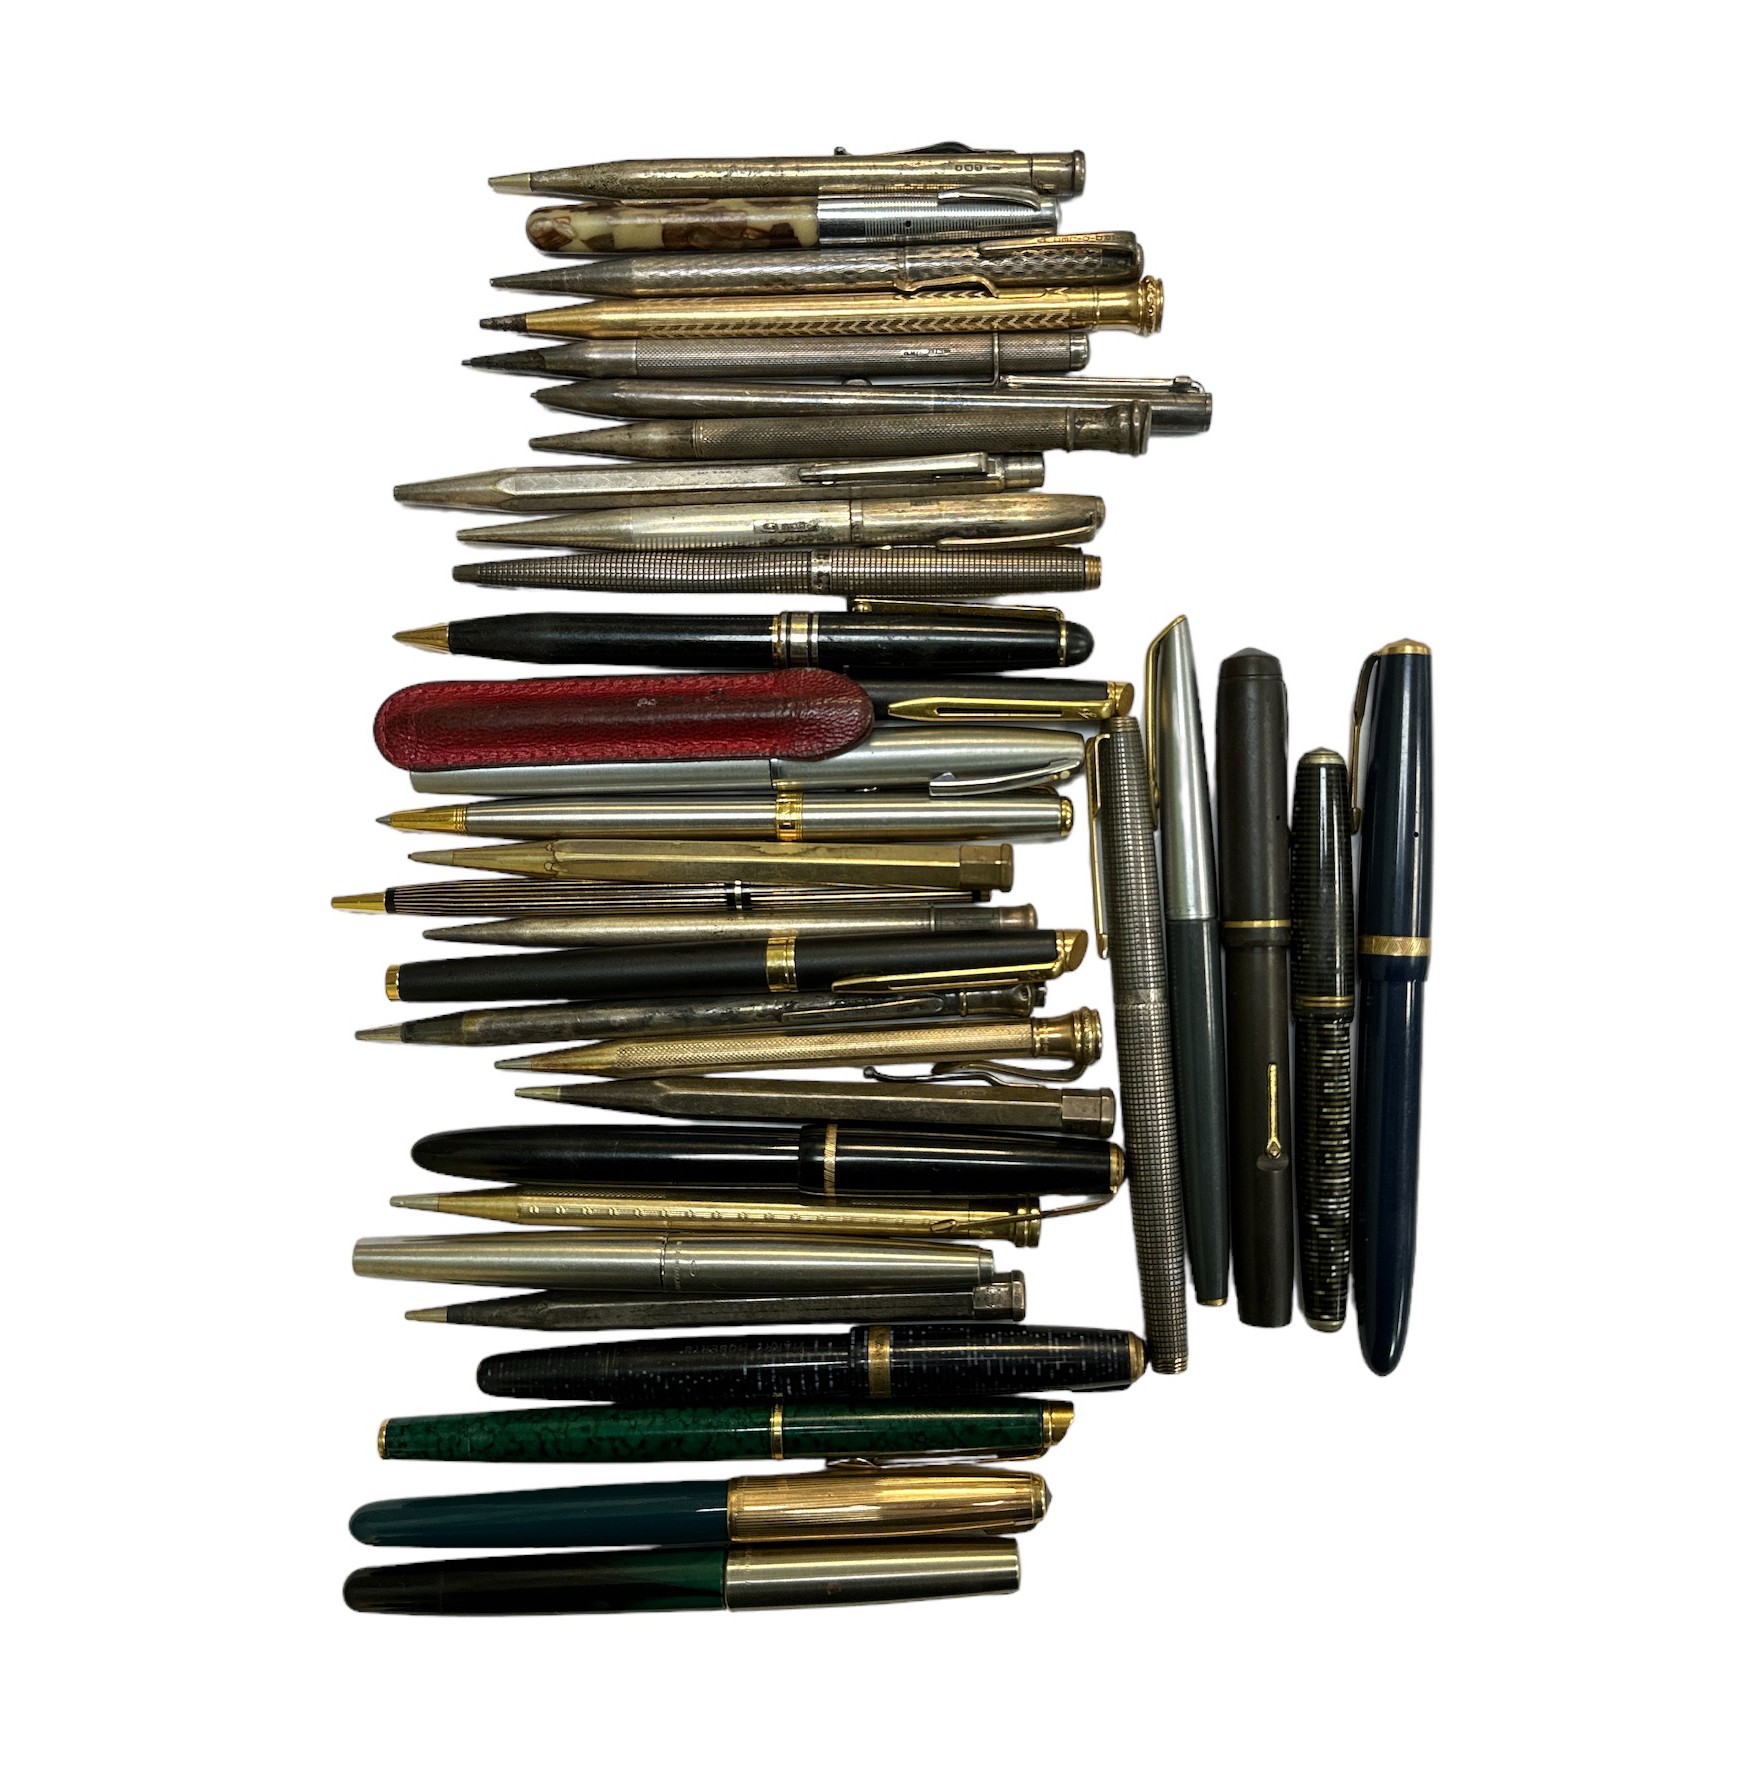 Collection of fountain pens (12) including Watermans with 18ct gold nib, Conway Stewart with 14ct